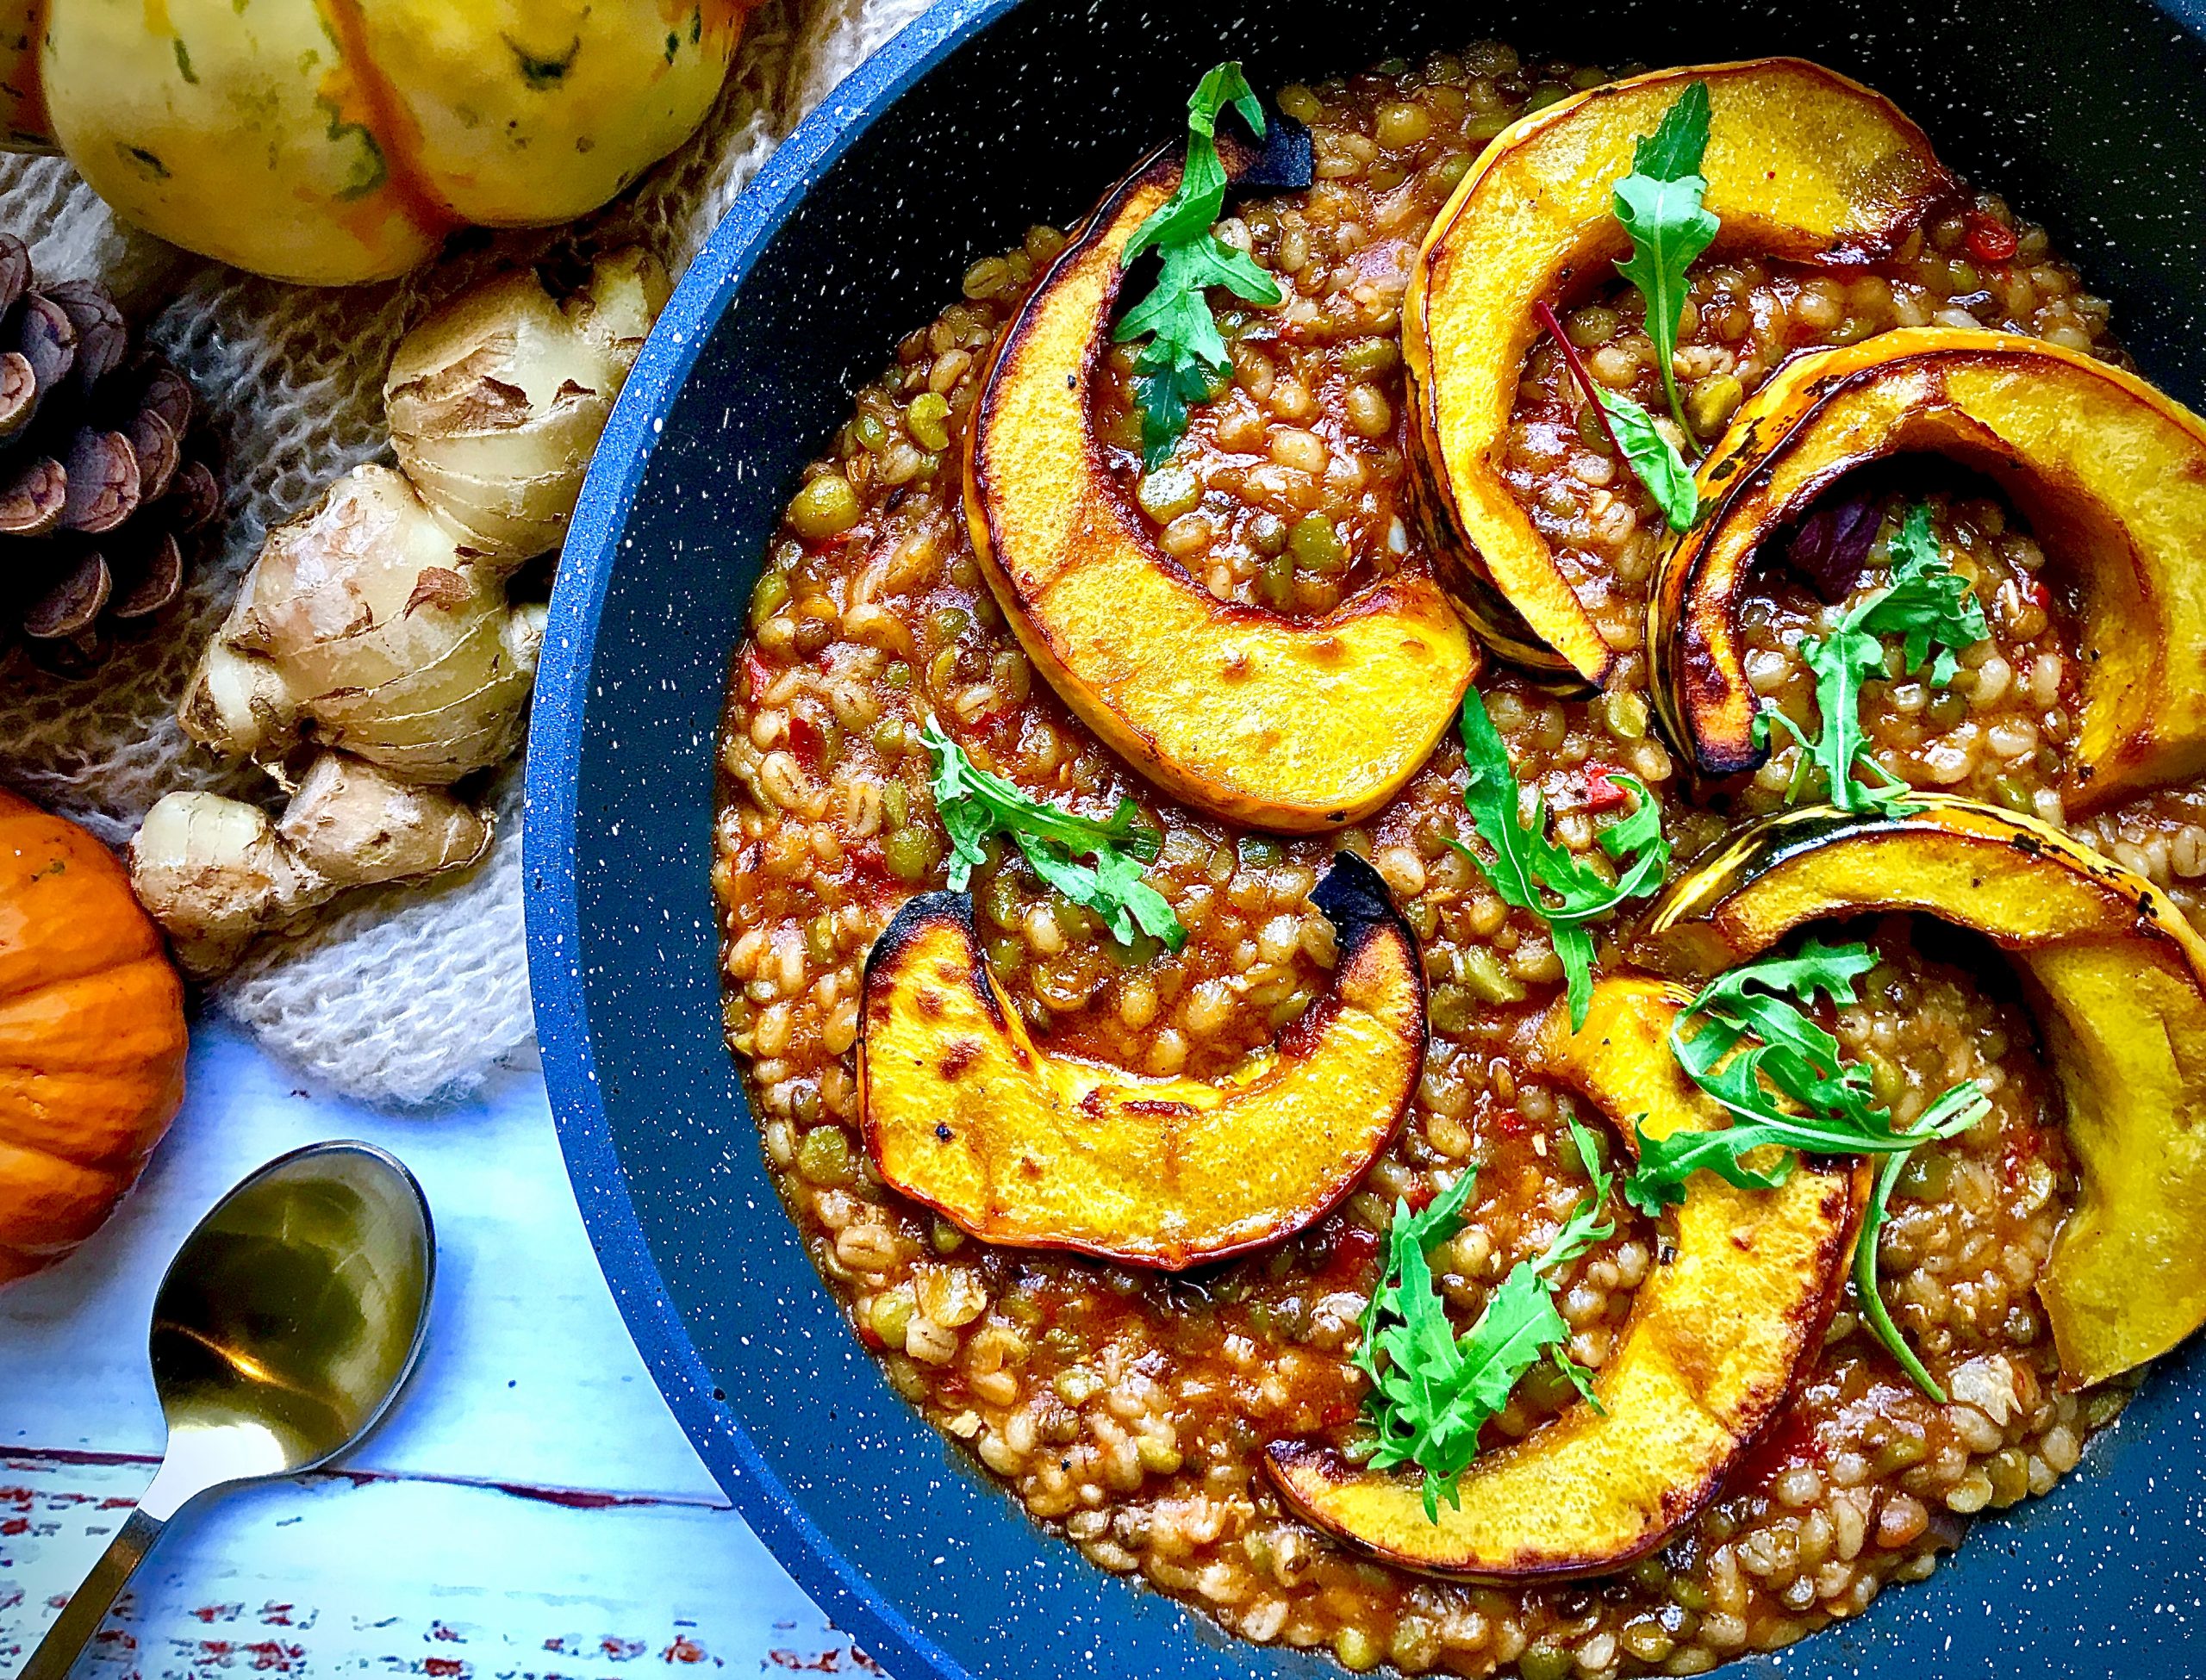 Roasted Squash on Spiced Barley Risotto